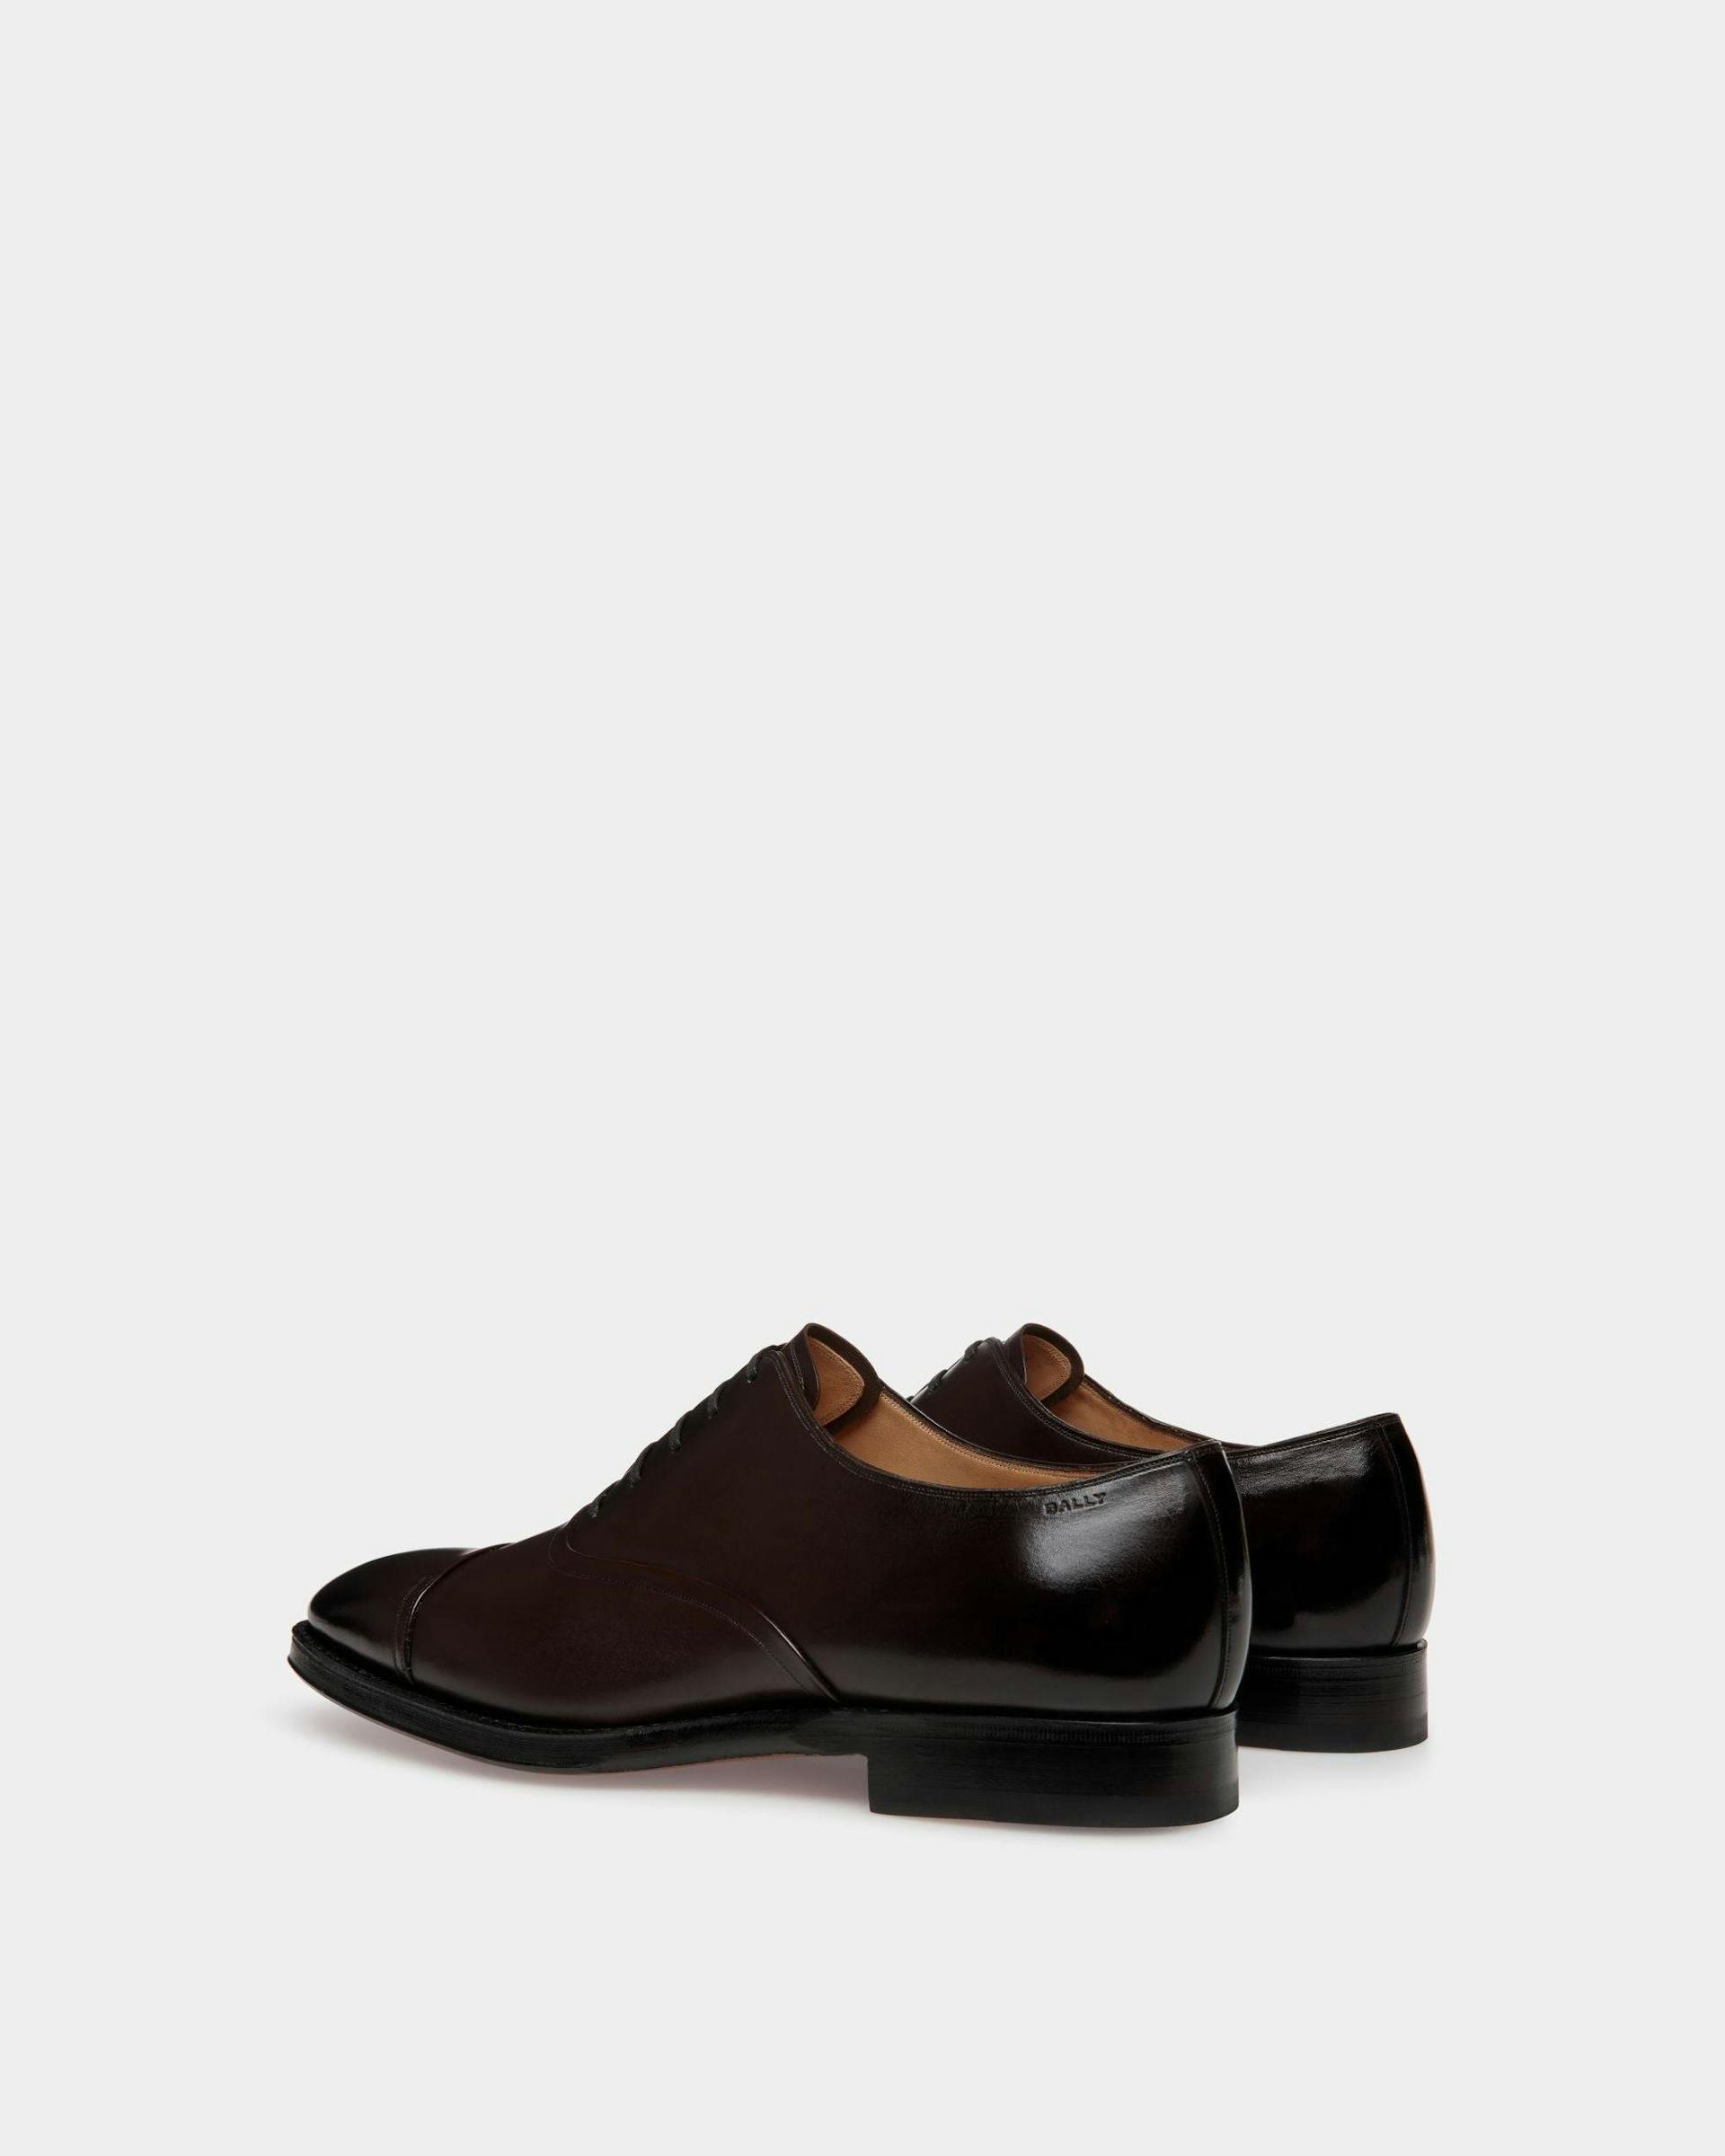 Scribe Oxford Shoes In Brown Leather - Men's - Bally - 03